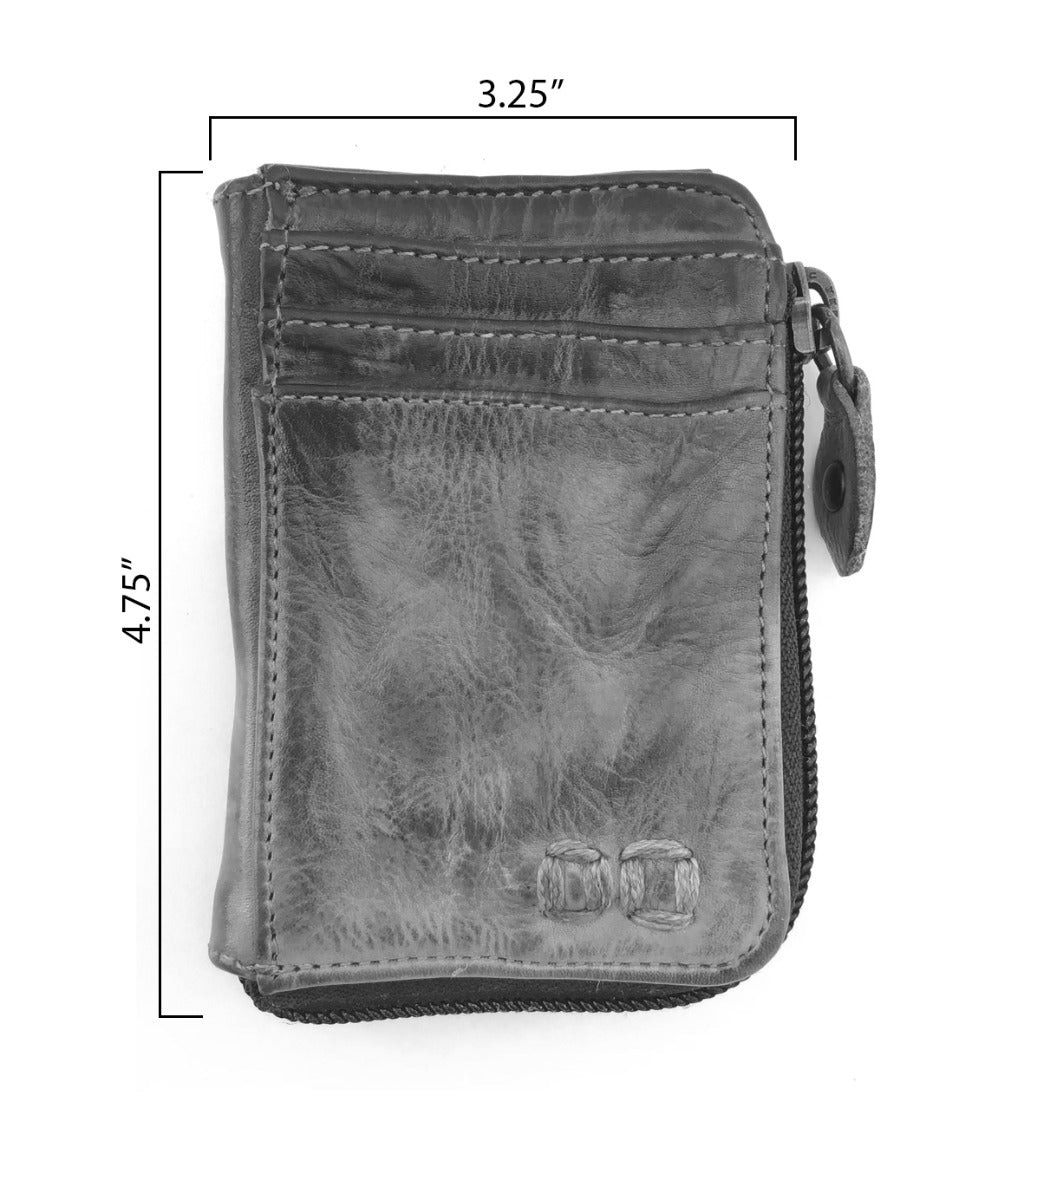 A black leather Carrie wallet with a zipper and measurements by Bed Stu.